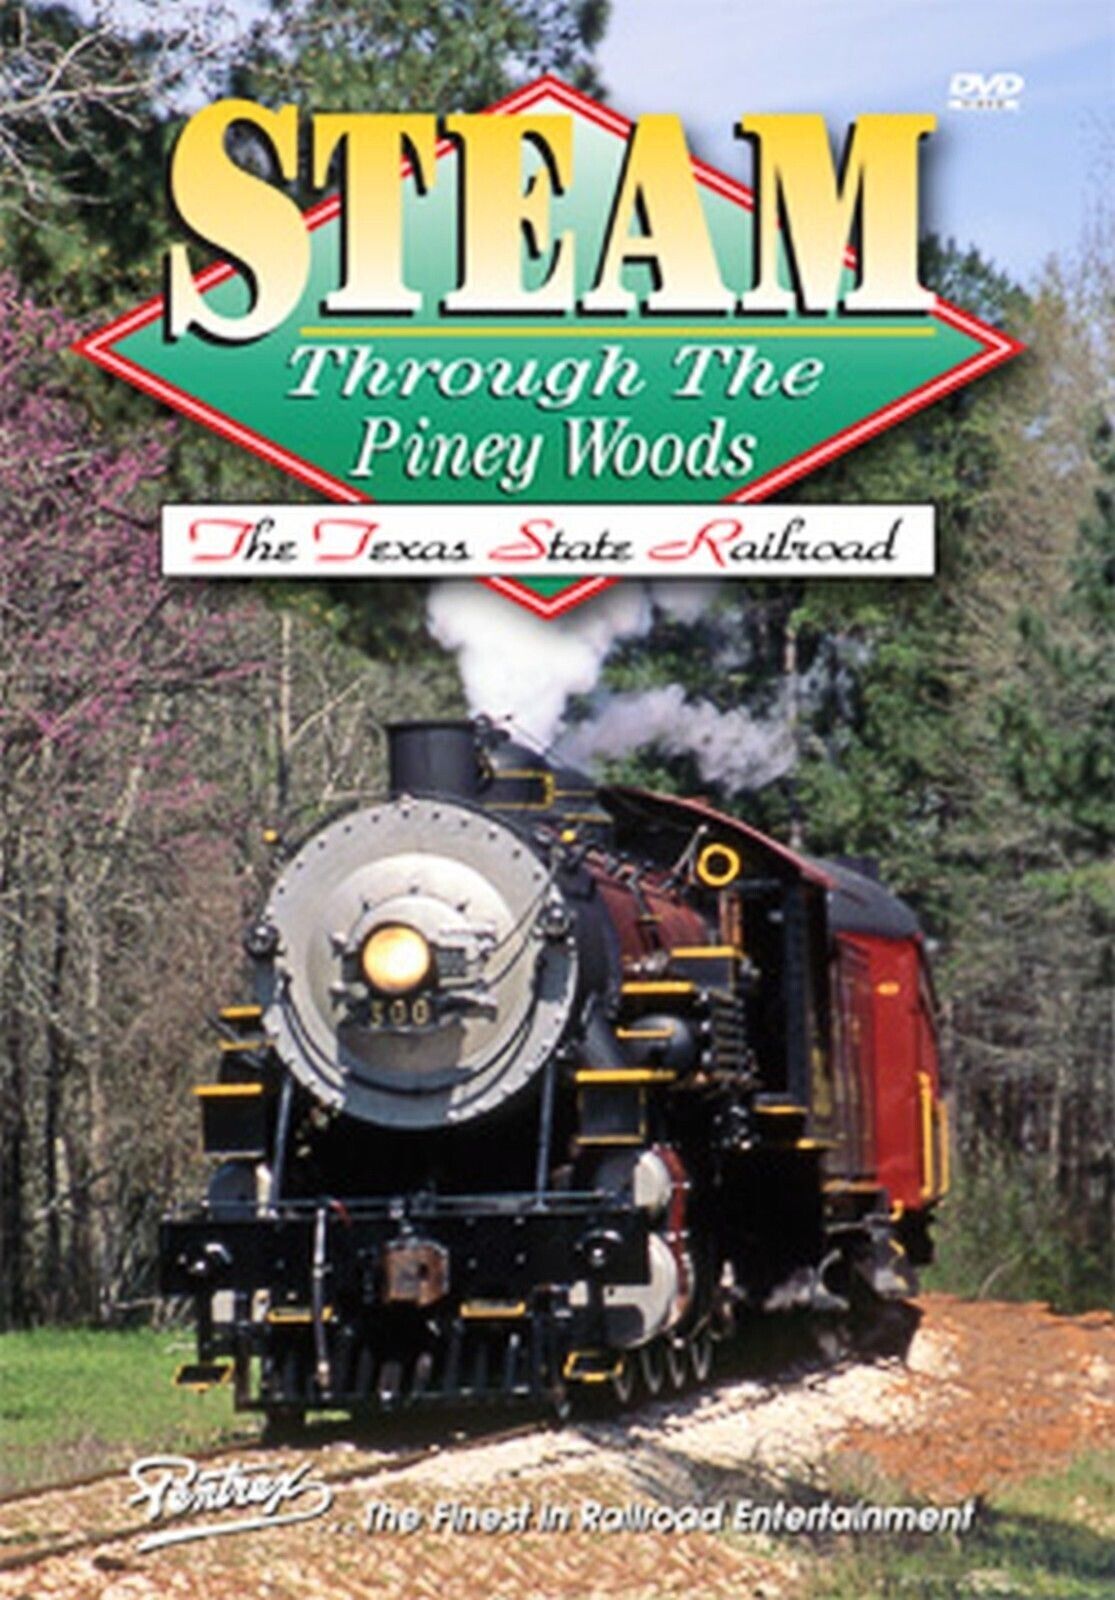 NEW Steam Through the Piney Woods DVD by Pentrex